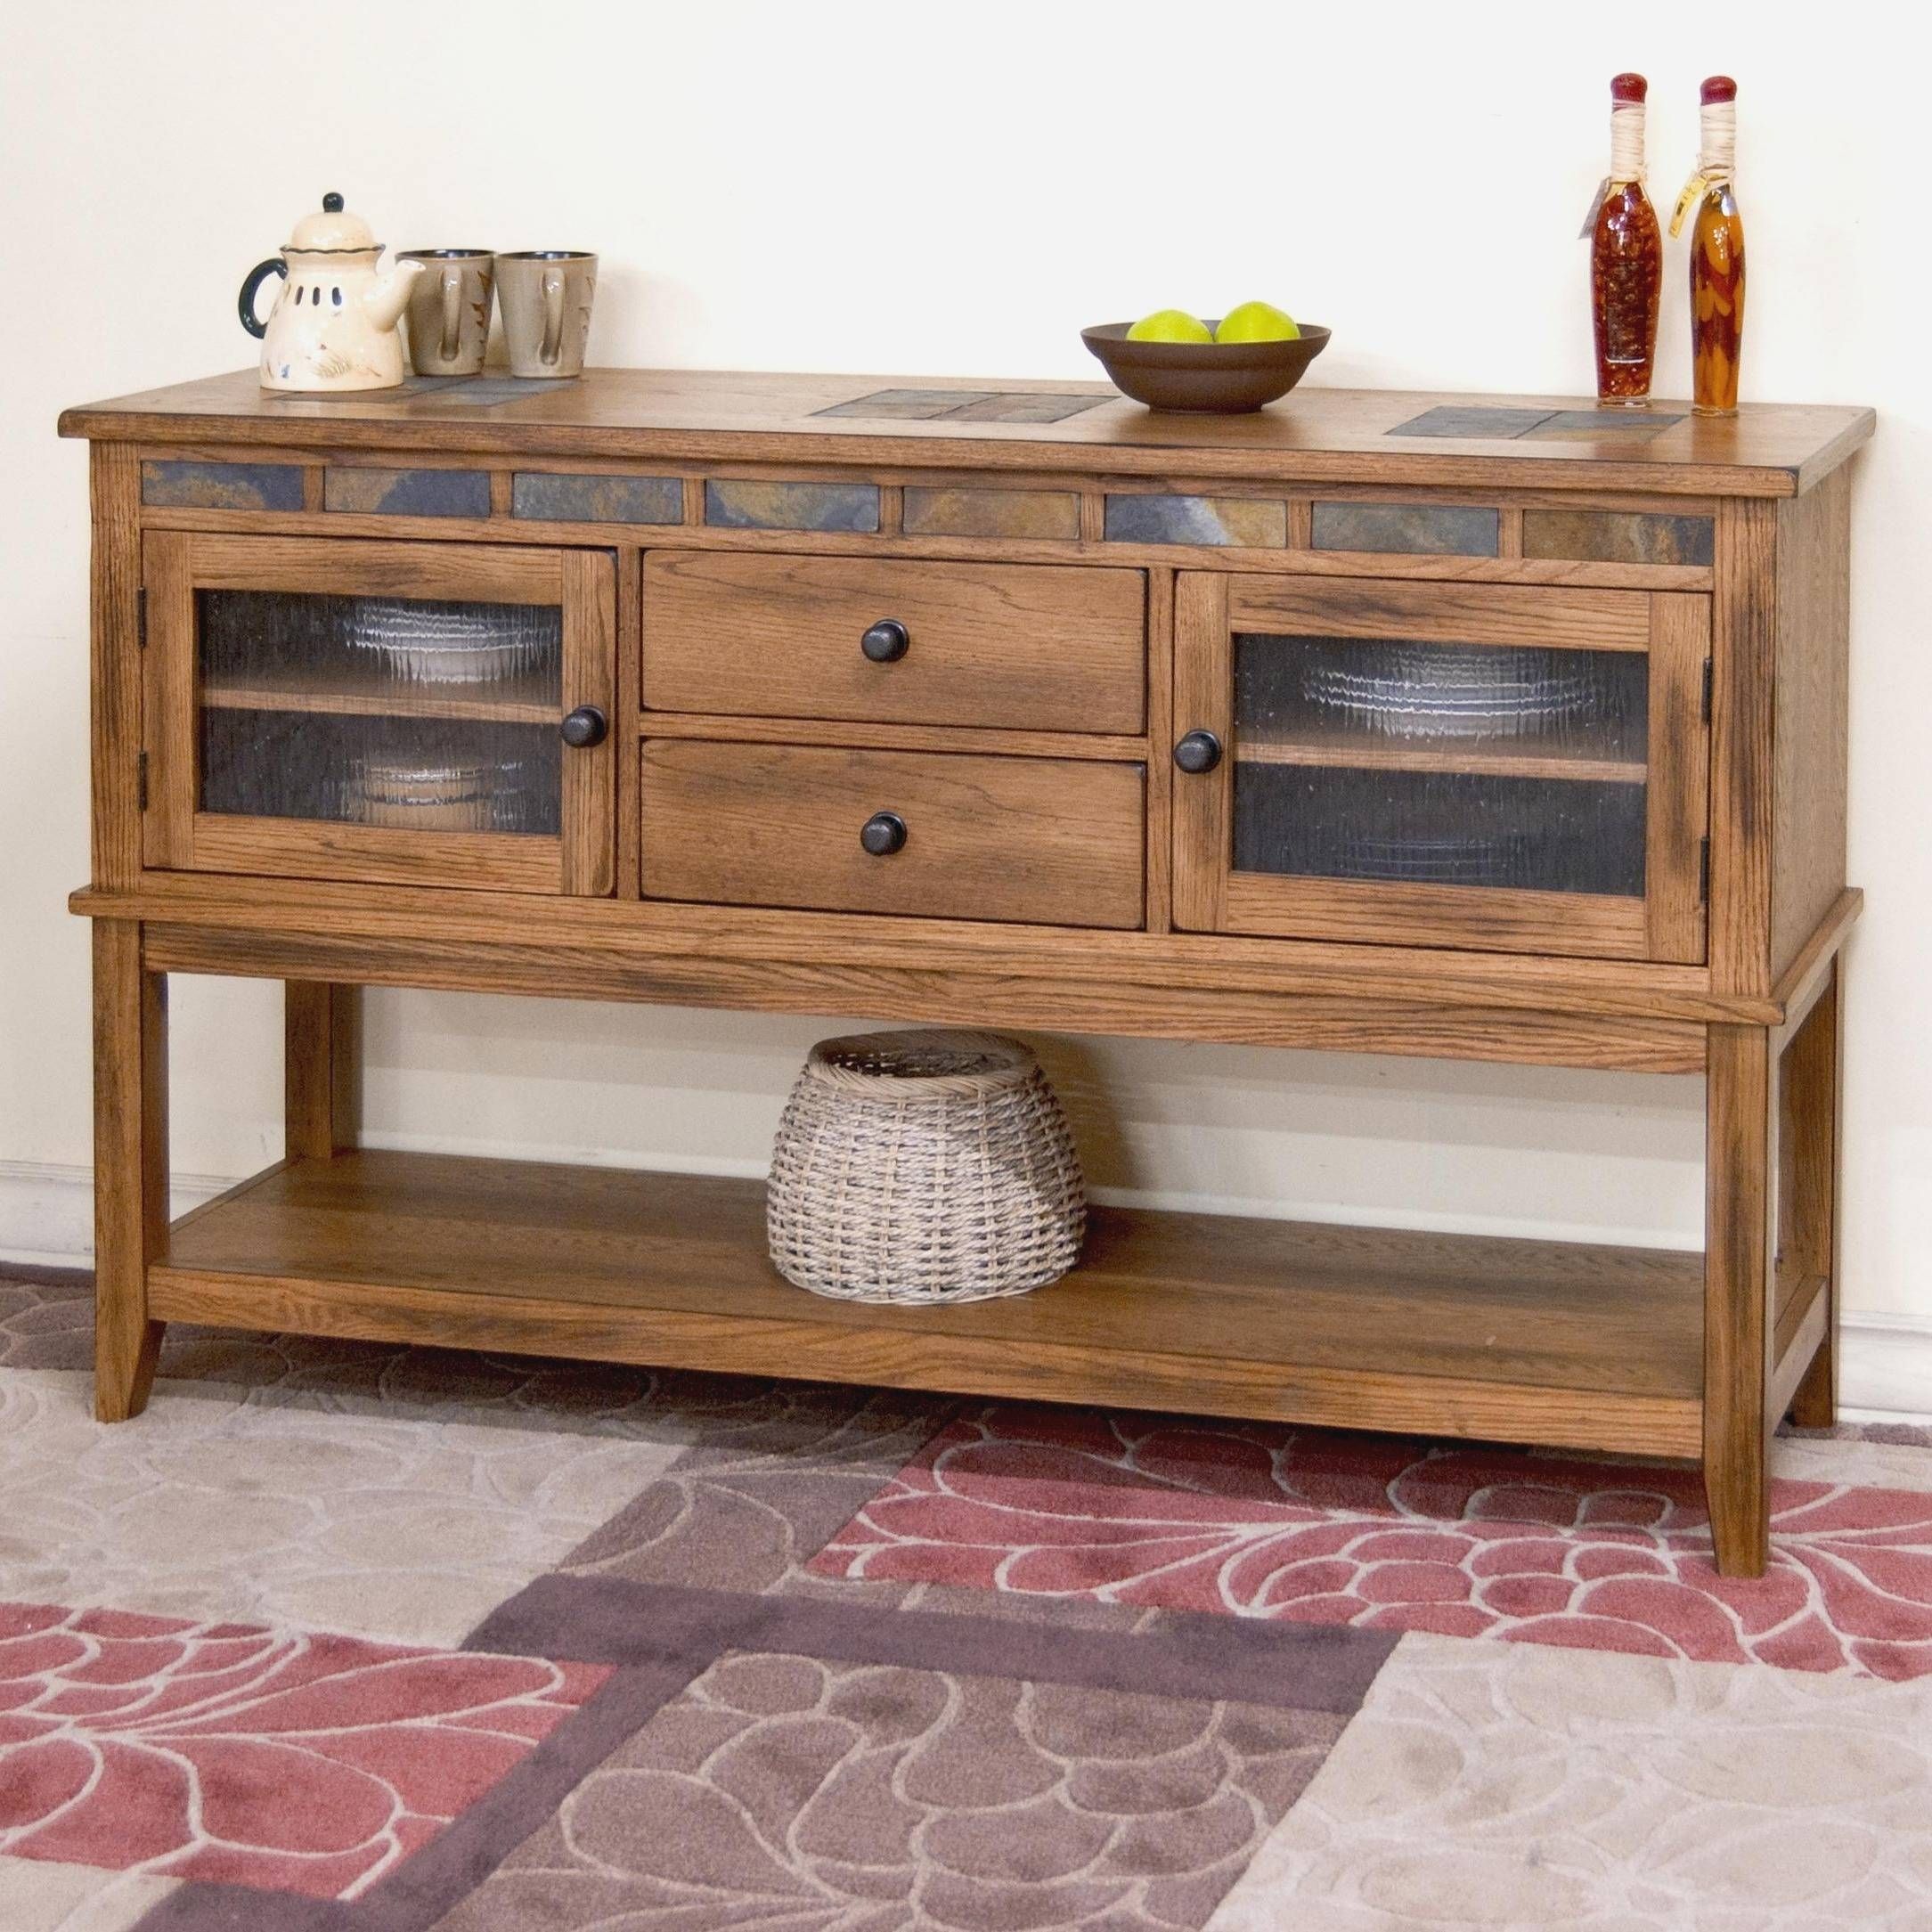 Beautiful Sideboards And Servers – Bjdgjy Throughout Most Recent Sideboards And Servers (View 11 of 15)